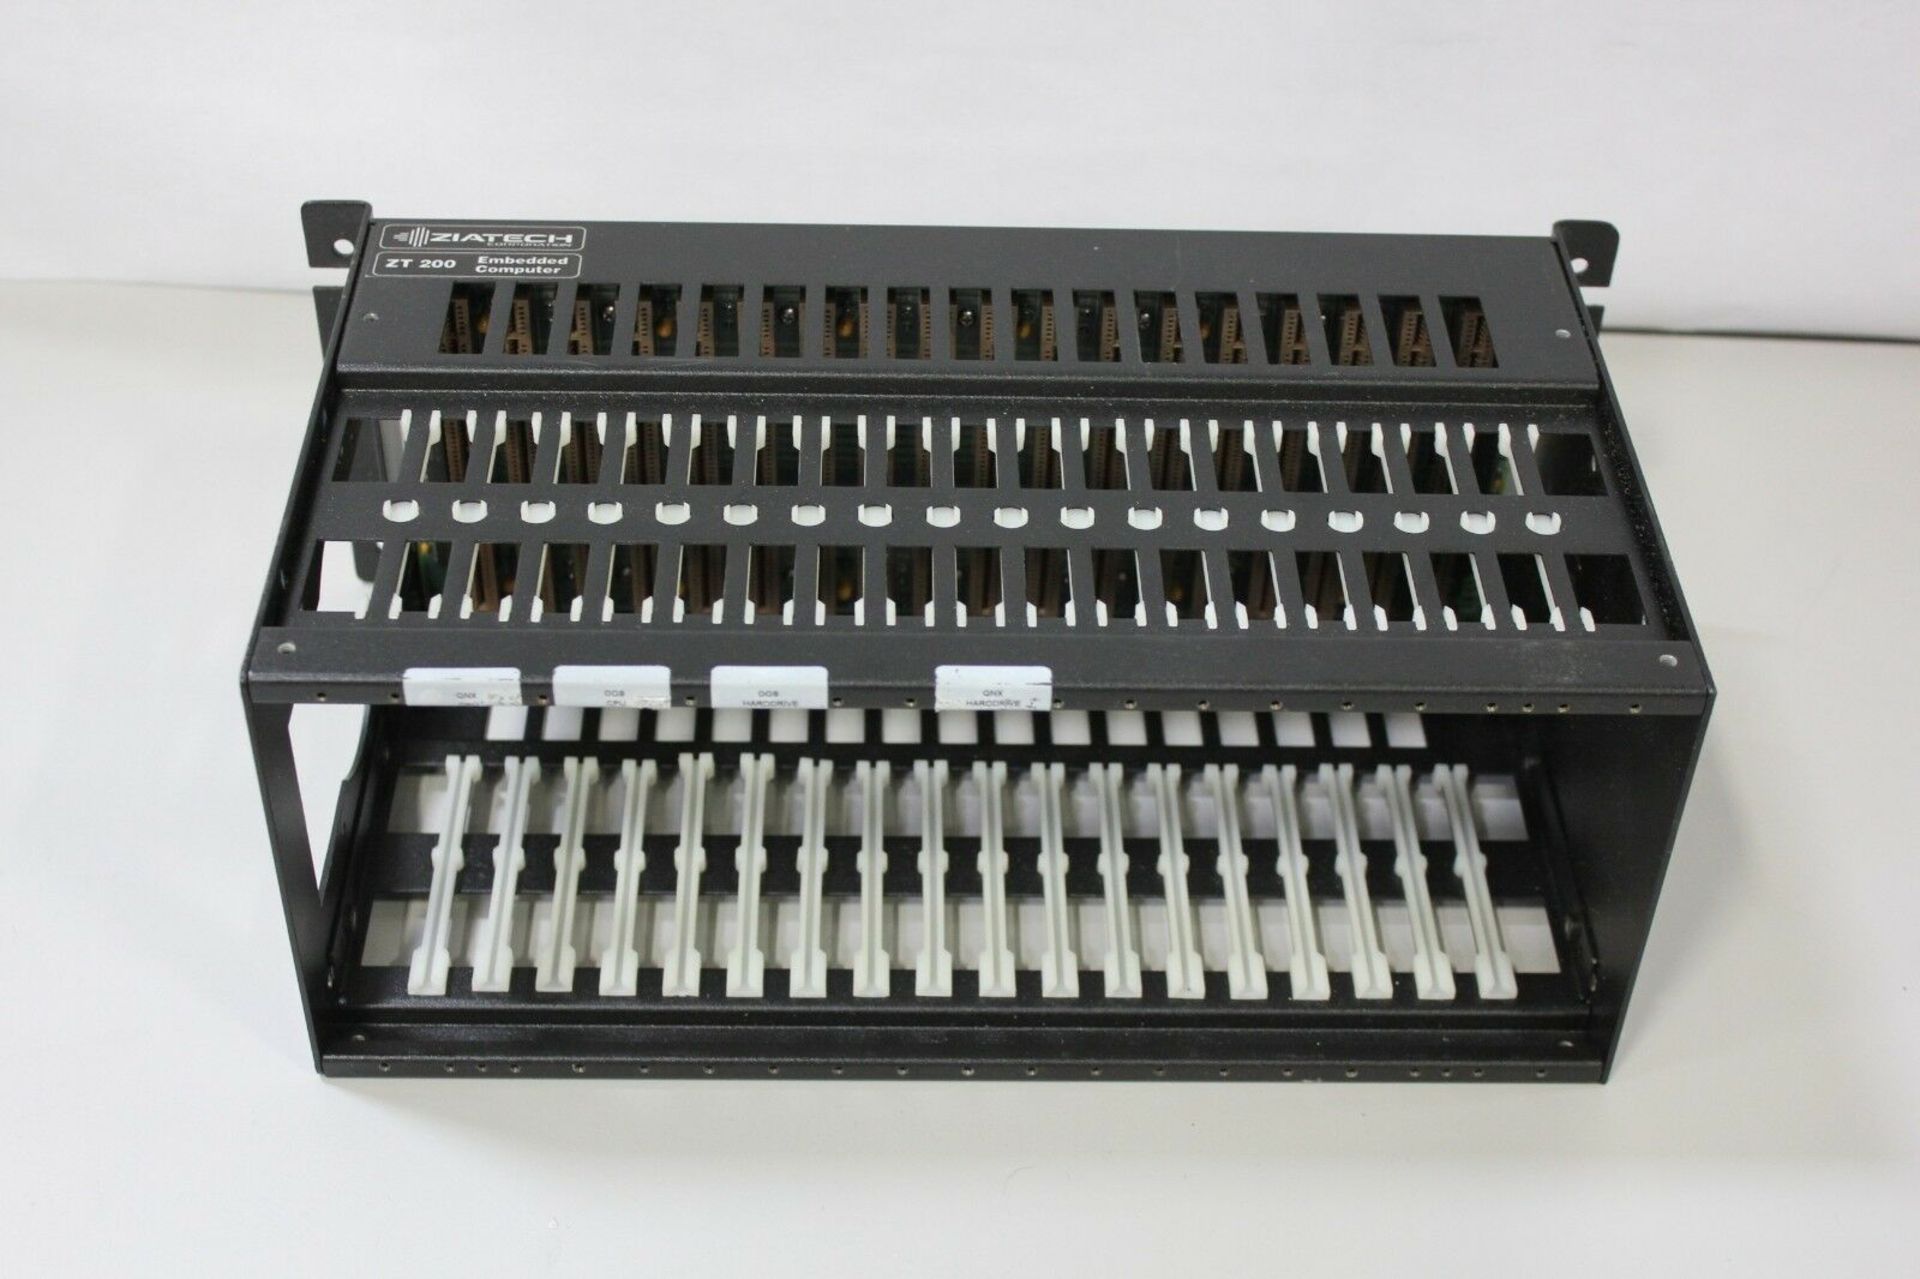 Ziatech 18 Slot STD Bus Embedded Computer Card Cage Backplane